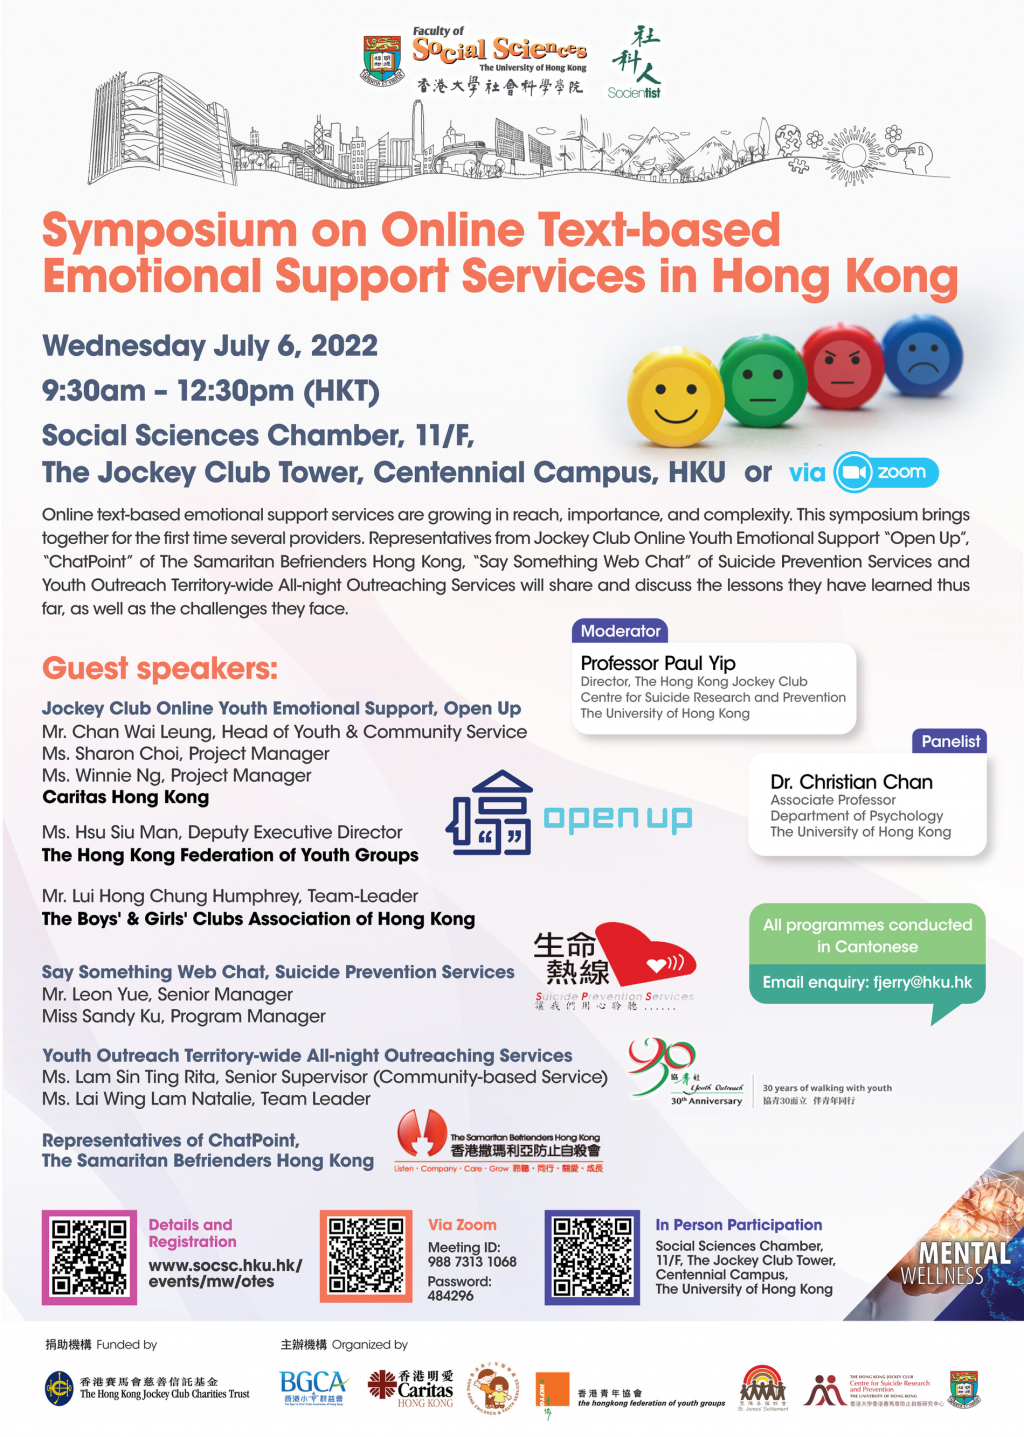 Symposium on Online Text-based Emotional Support Services in Hong Kong